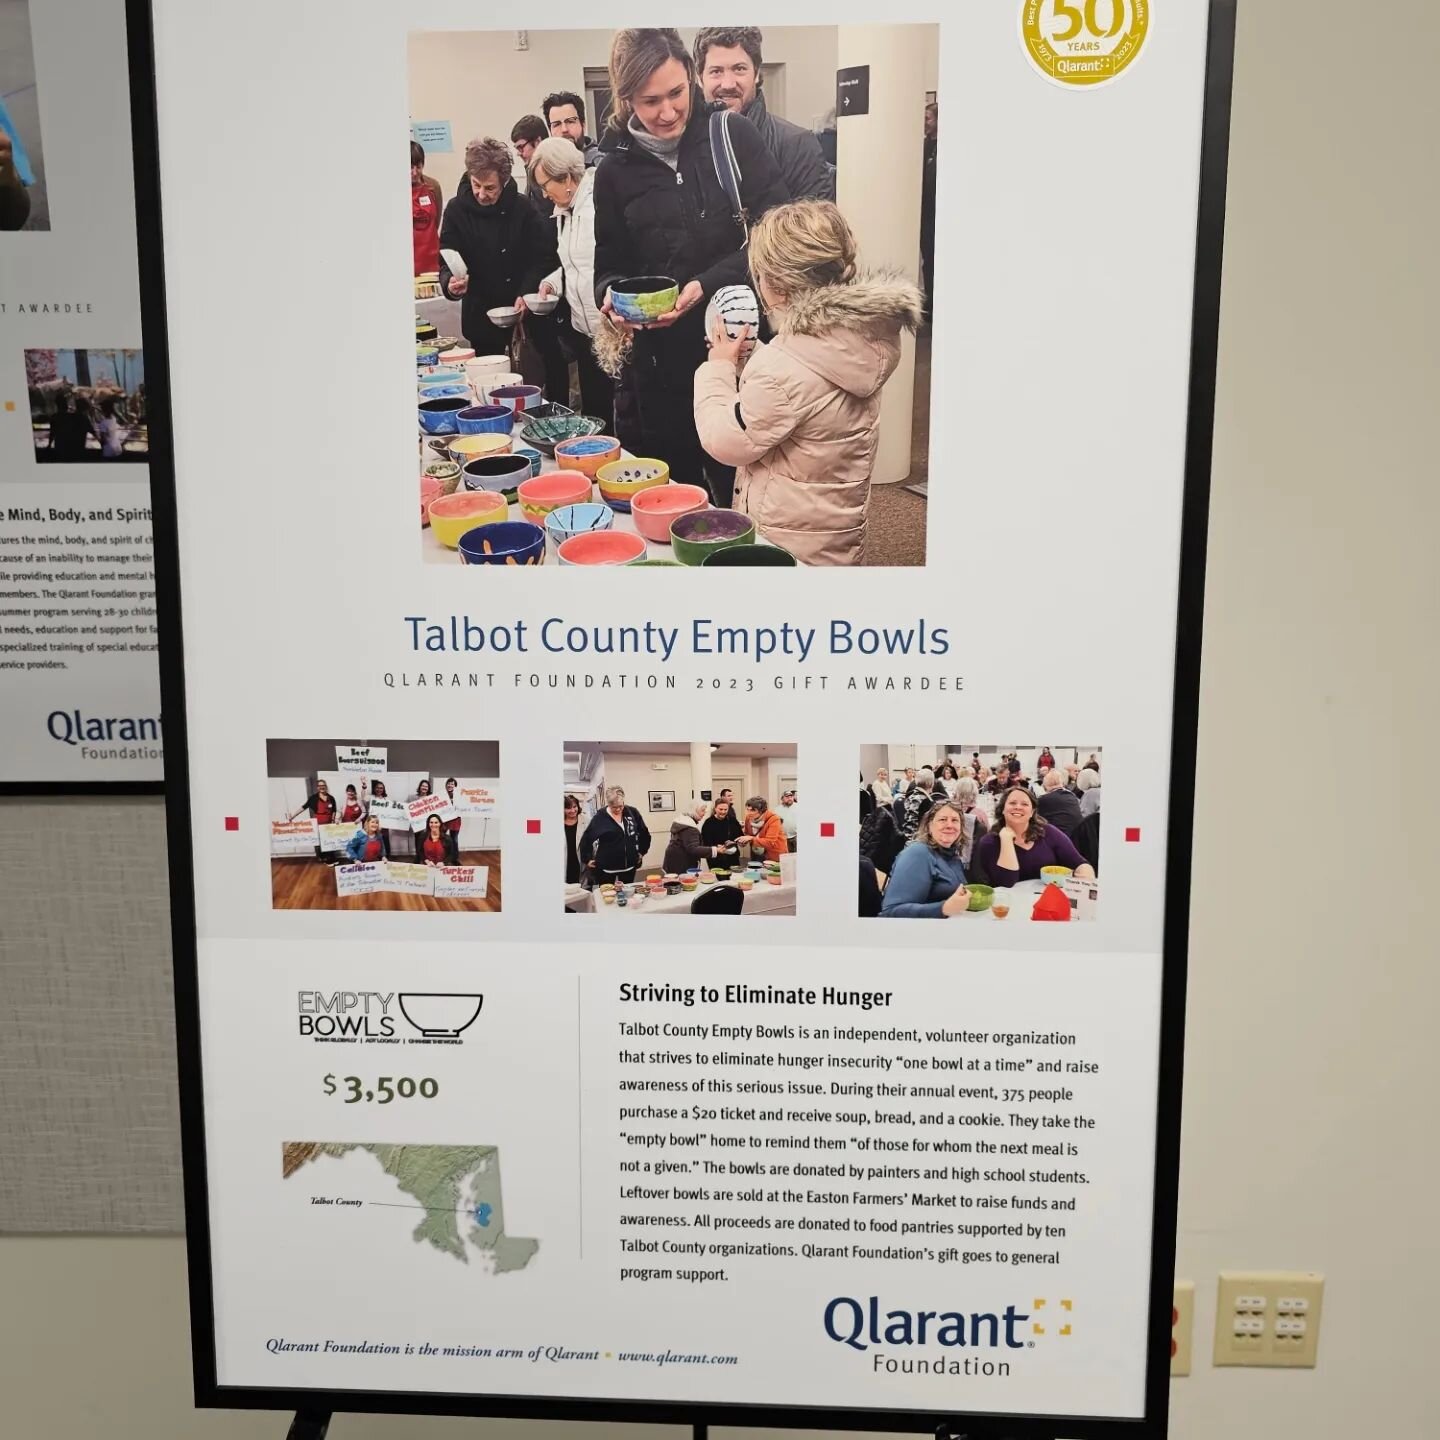 Thanks to @Qlarant for this generous grant and for helping us to fill more Empty Bowls in Talbot County. We are so grateful for all your support! It was wonderful meeting you all at the luncheon!